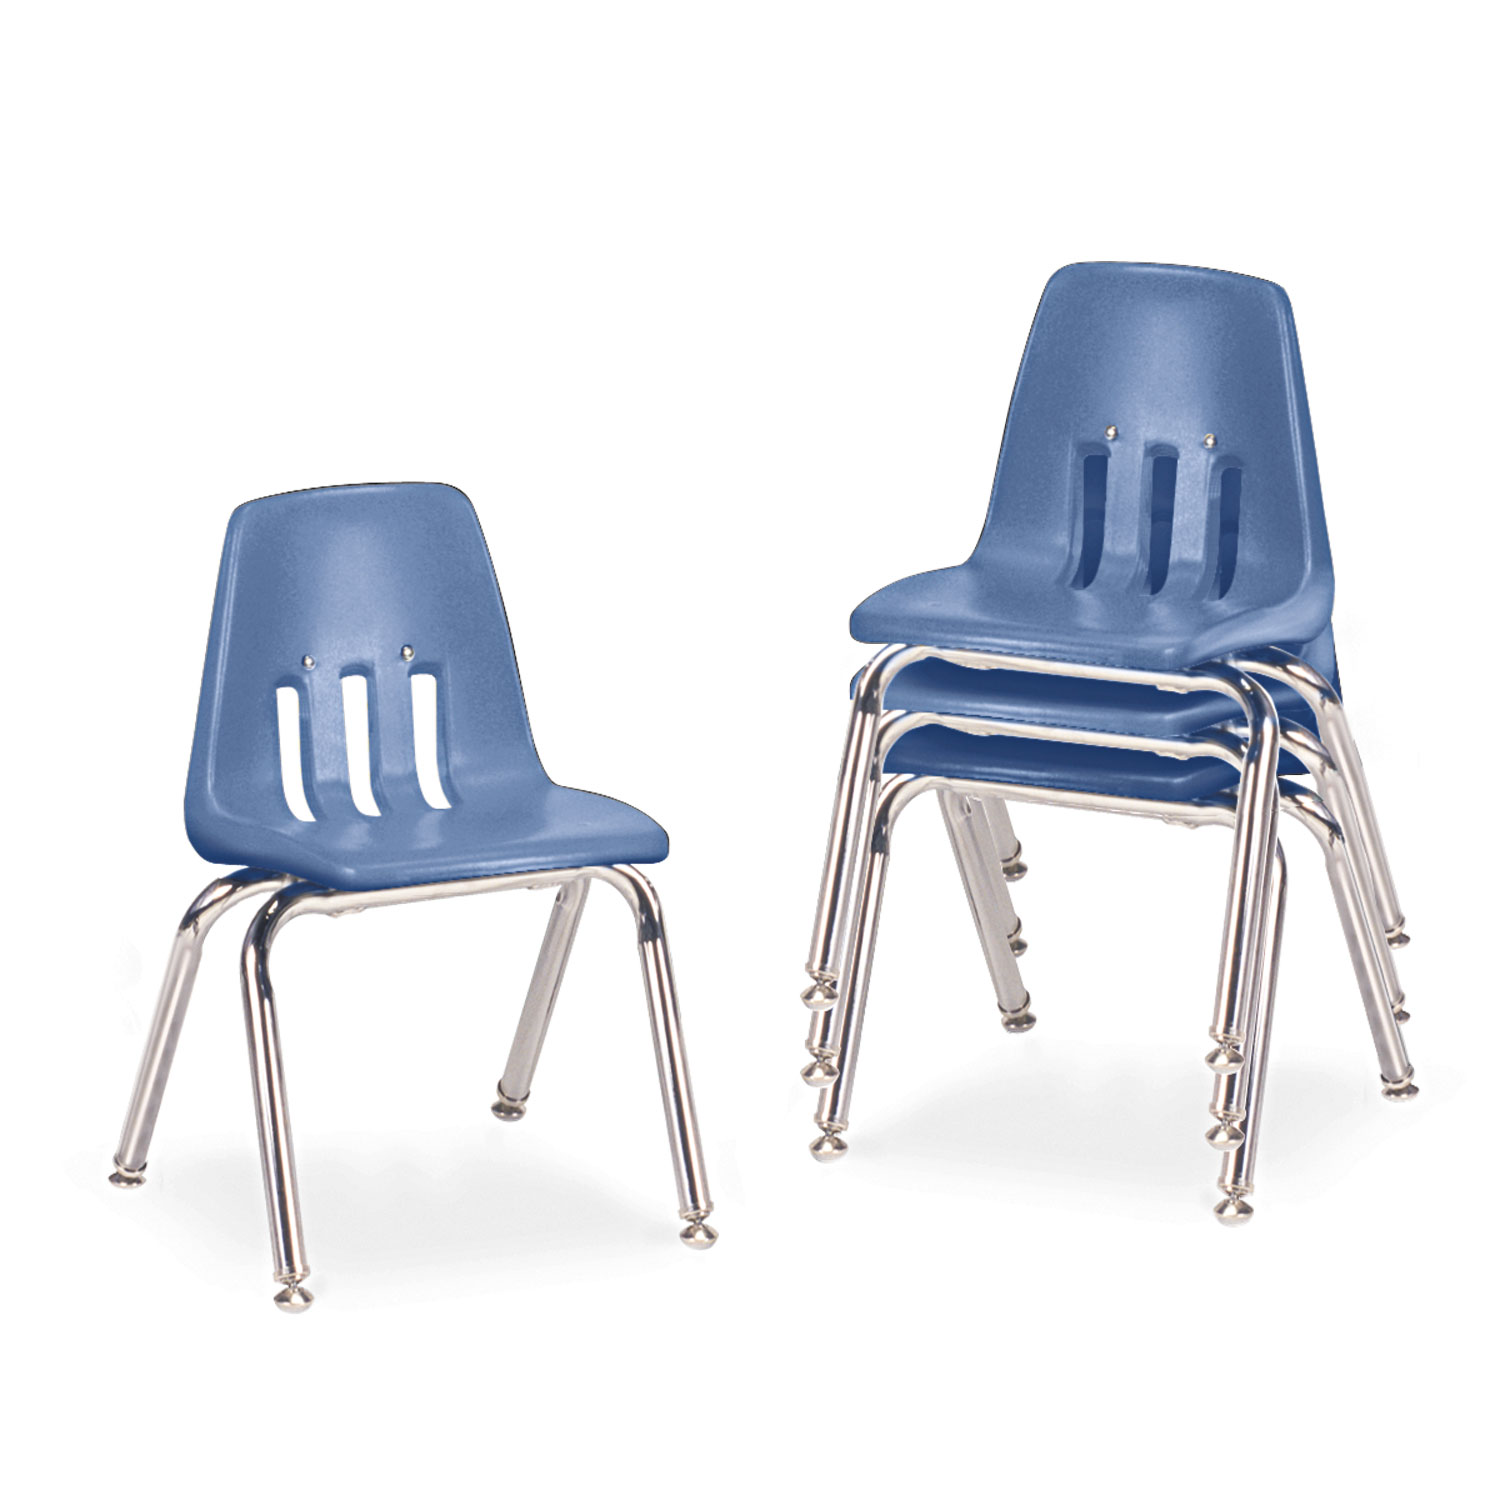 9000 Series Classroom Chairs, 14 Seat Height, Blueberry/Chrome, 4/Carton